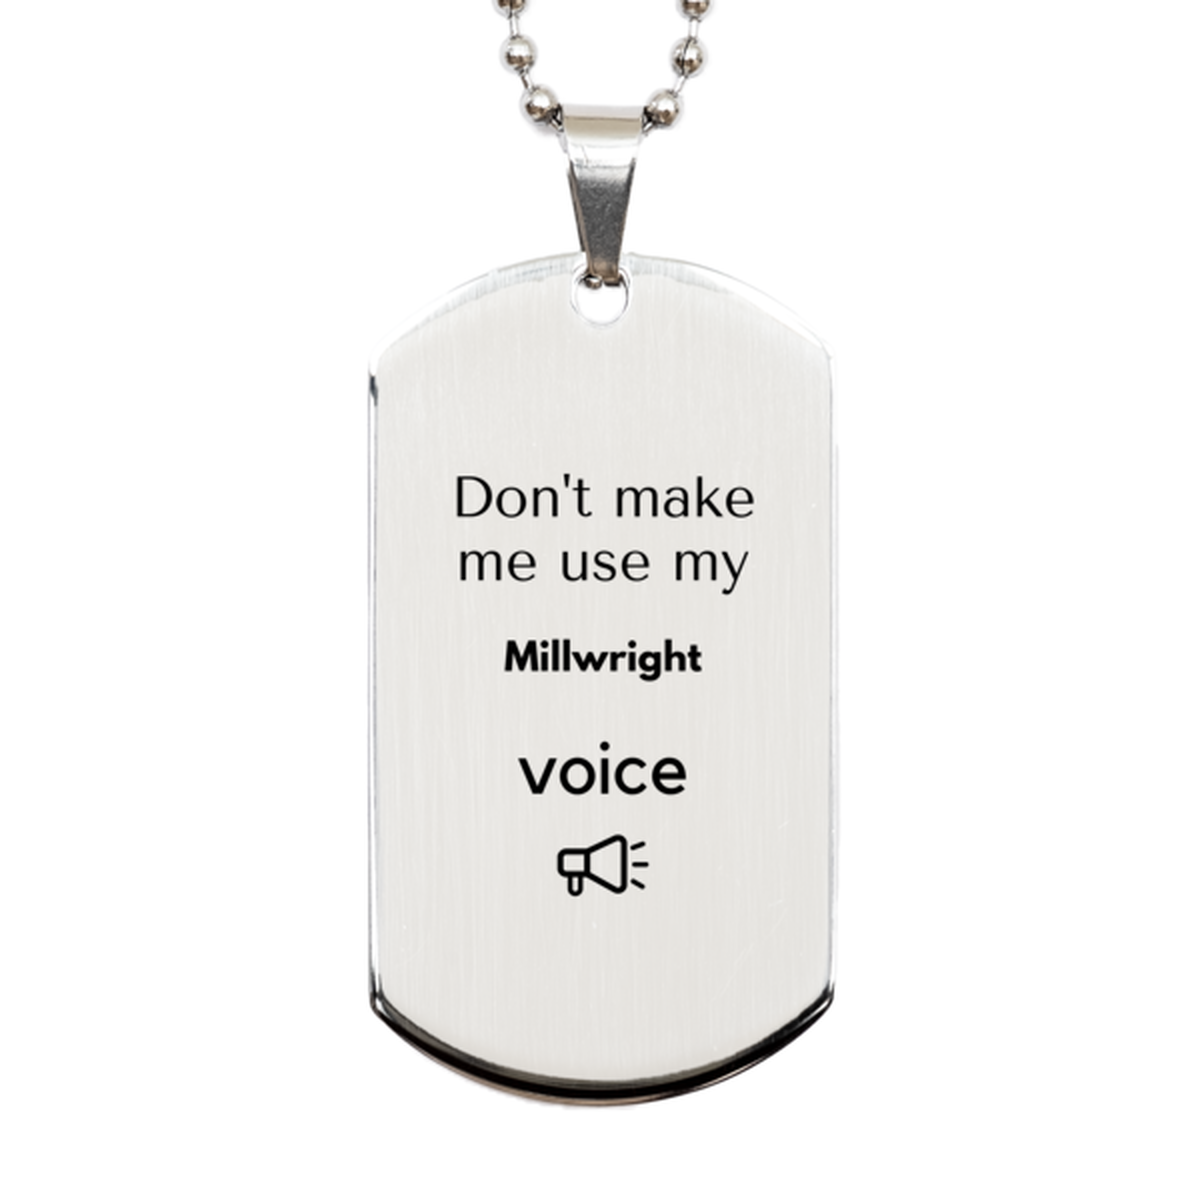 Don't make me use my Millwright voice, Sarcasm Millwright Gifts, Christmas Millwright Silver Dog Tag Birthday Unique Gifts For Millwright Coworkers, Men, Women, Colleague, Friends